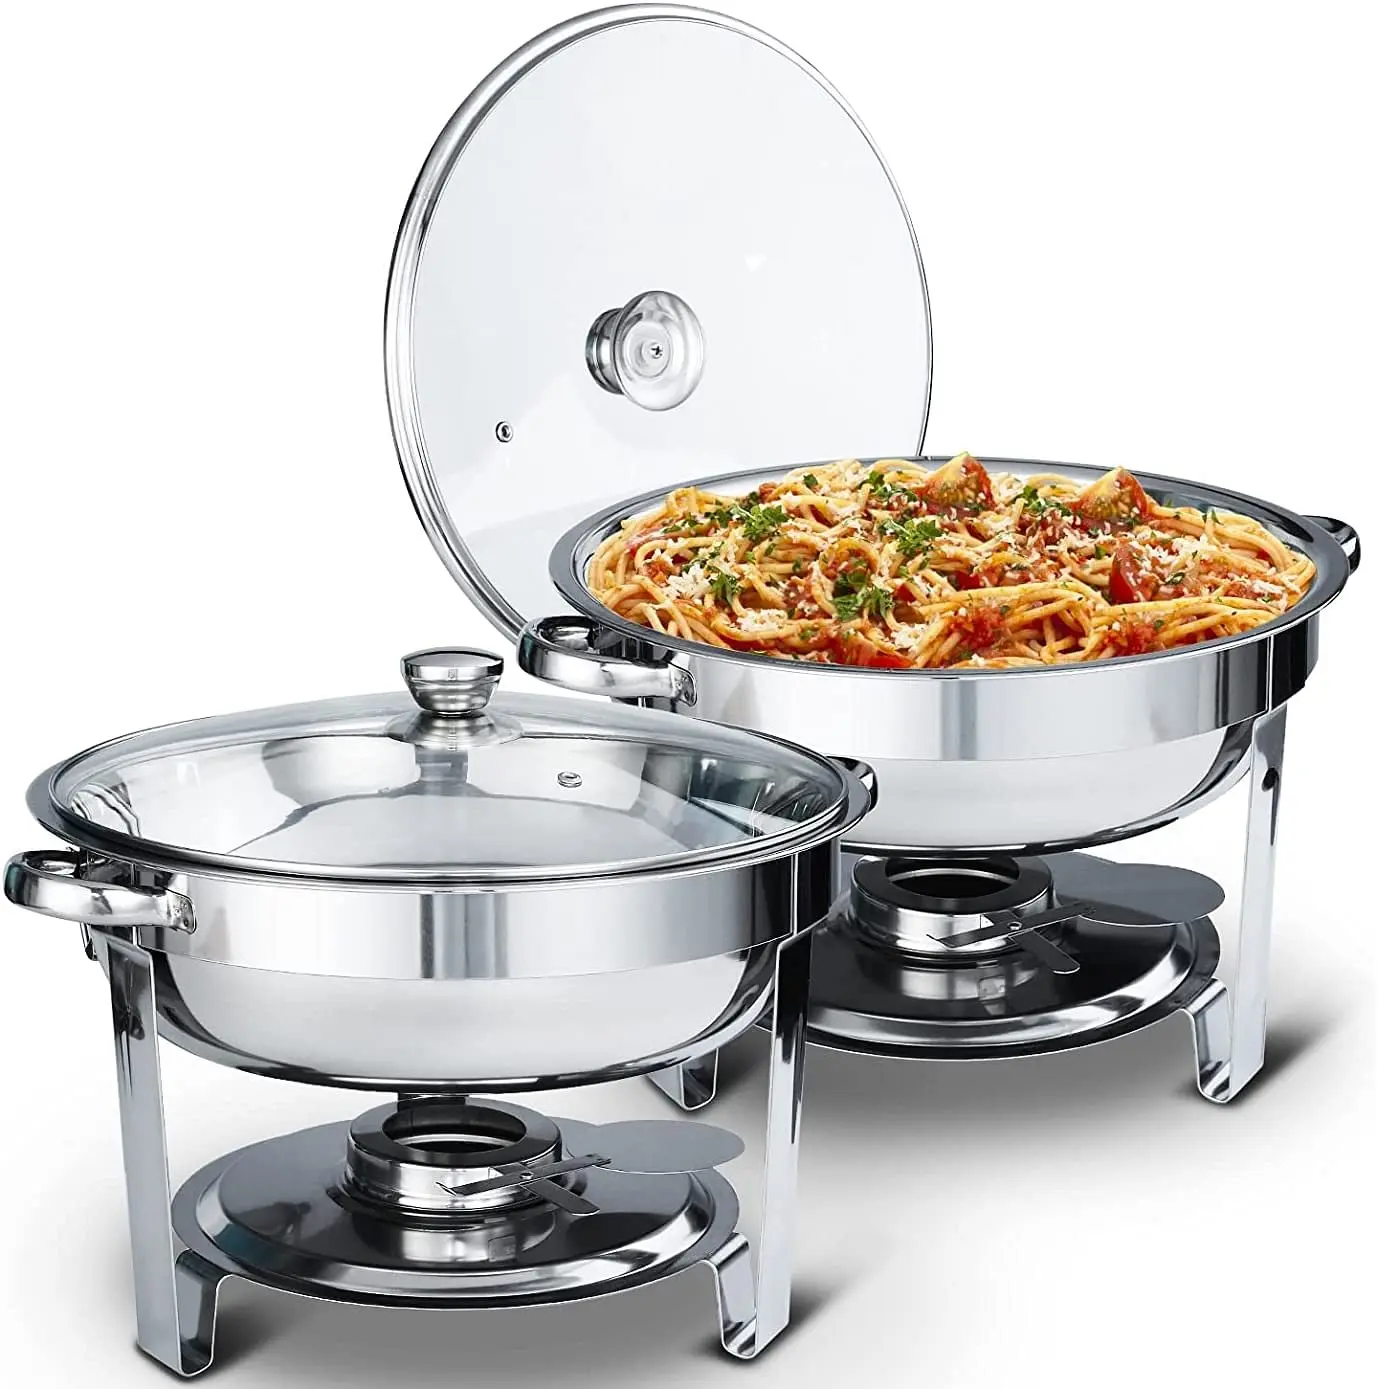 Wholesaler Hotel Kitchen Catering Serving Chafing Dish Glossy Polished Silver Plated Chafing Dish At Affordable Price